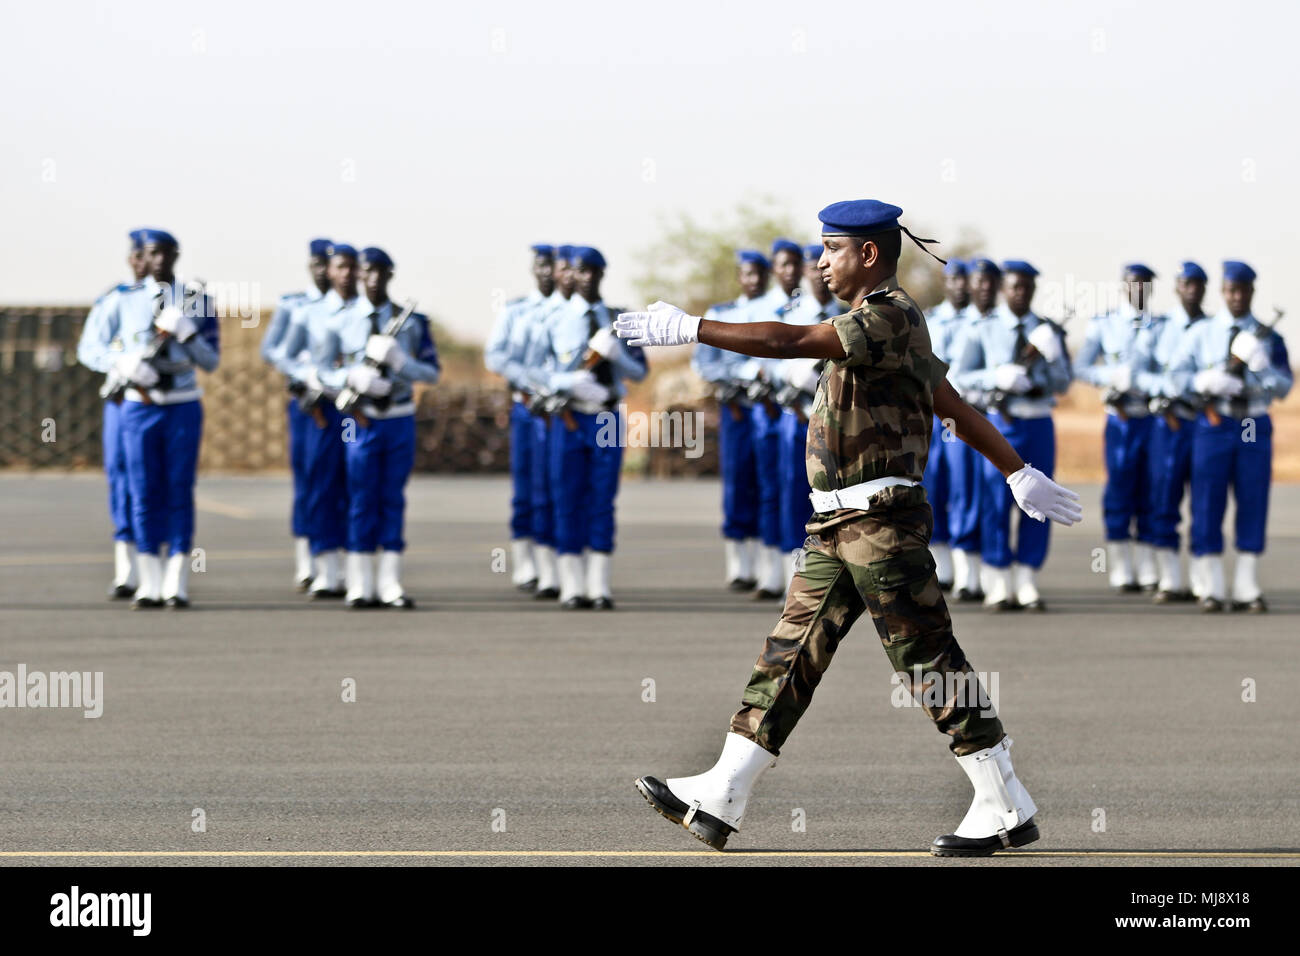 A Nigerien Soldier marches across the airfield at the start of the closing ceremony of Flintlock 2018 in Niamey, Niger, April 20, 2018. Flintlock, hosted by Niger, with key outstations at Burkina Faso and Senegal, is designed to strengthen the ability of key partner nations in the region to counter violent extremist organizations, protect their borders, and provide security for their people. (U.S. Army Photo by Sgt. Heather Doppke/79th Theater Sustainment Command) Stock Photo